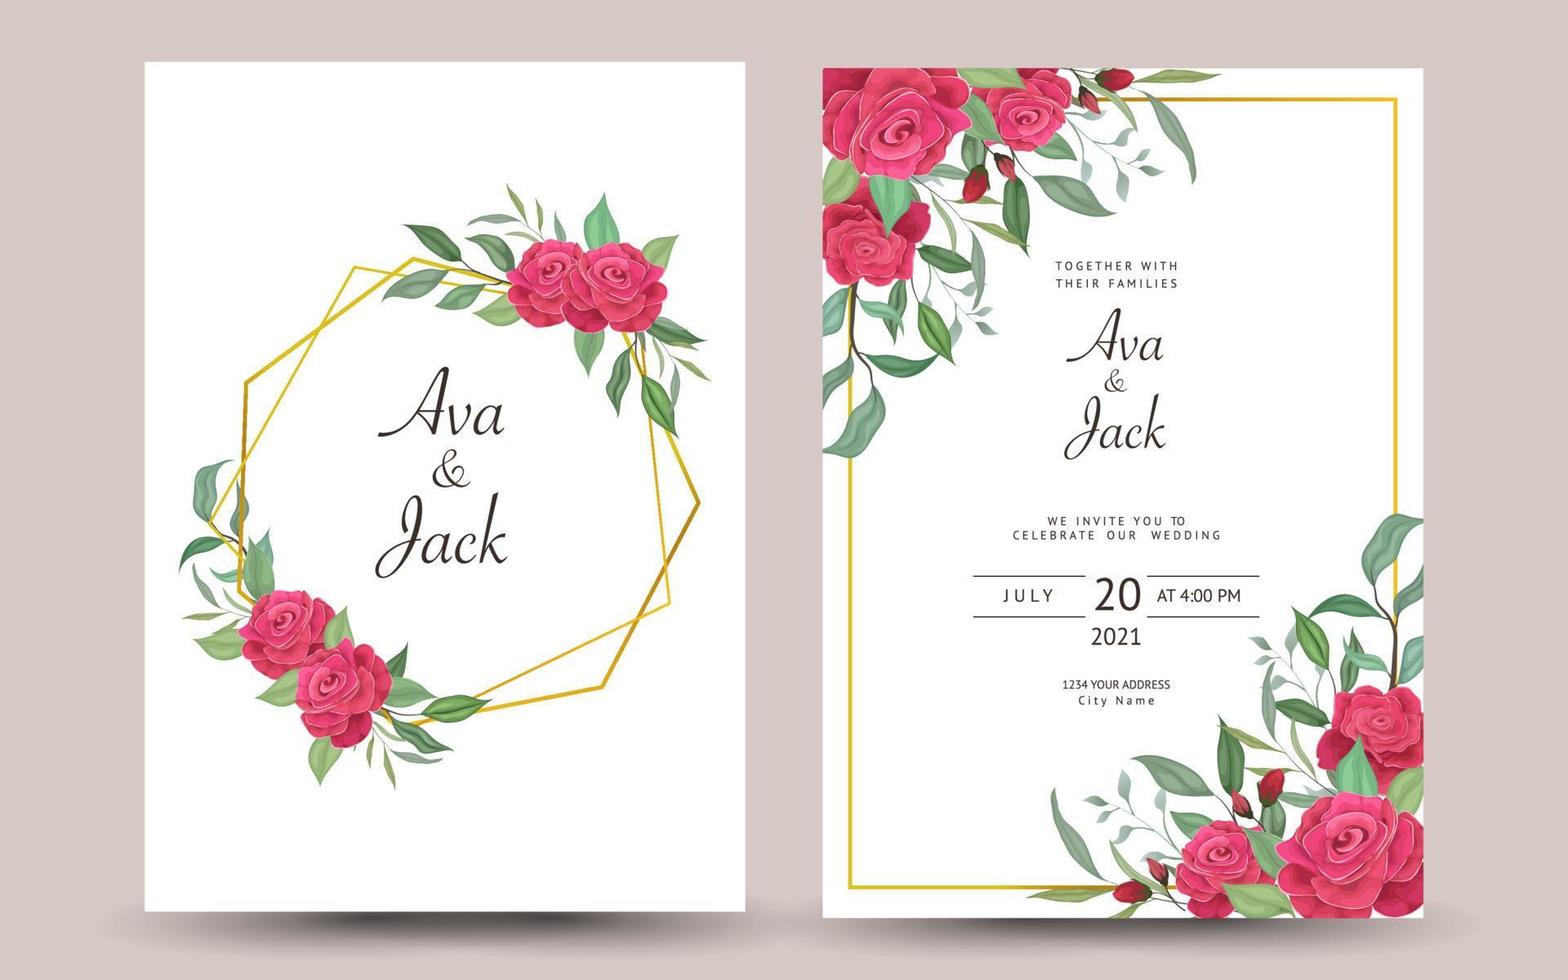 beautiful wedding invitation with floral background design. vector